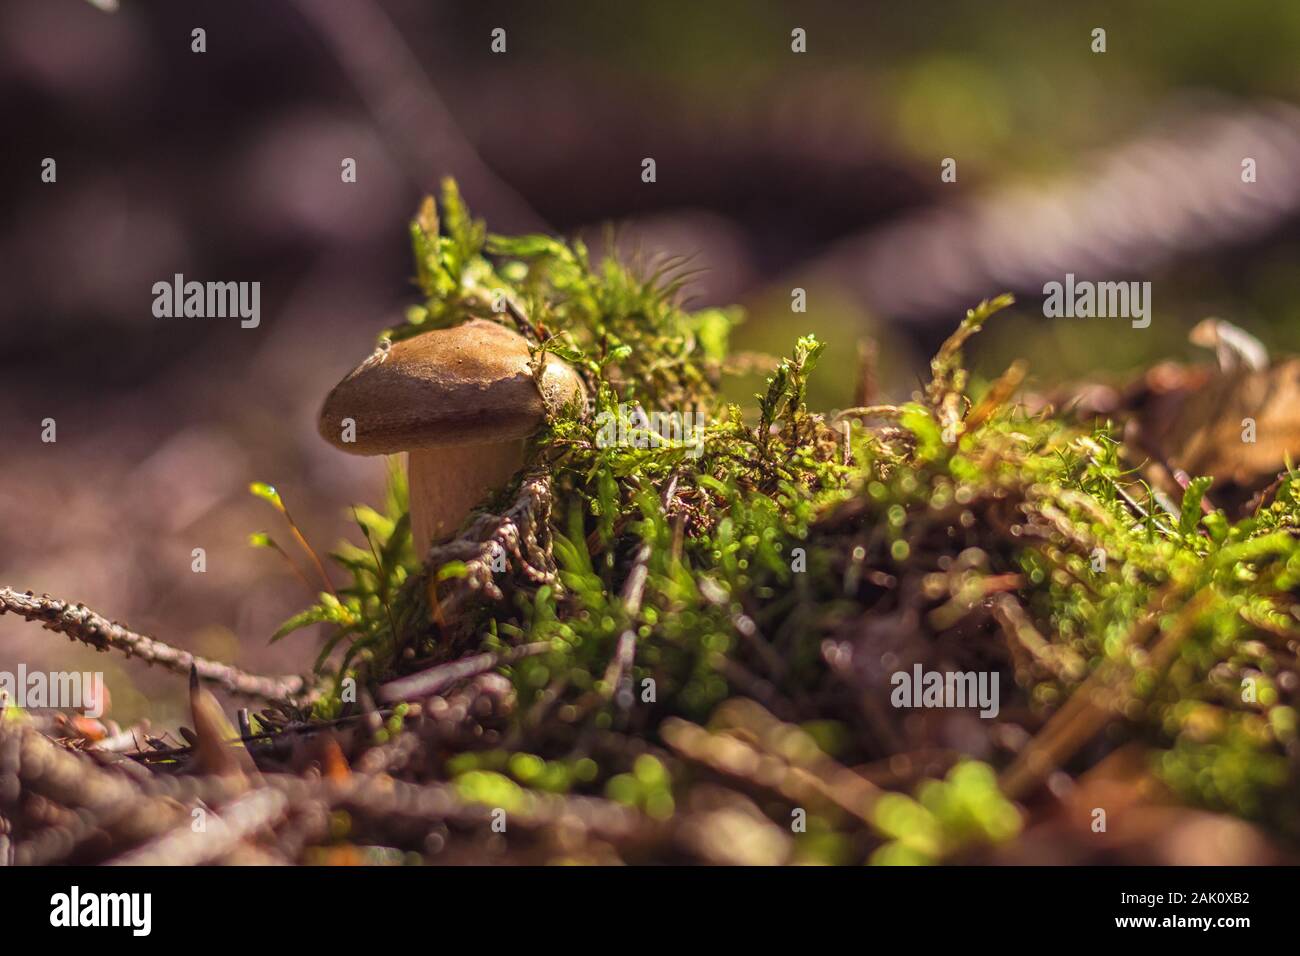 mushroom - close up view of a small mushroom hidden in moss and pine needles, in the forest, lit by sunlight Stock Photo